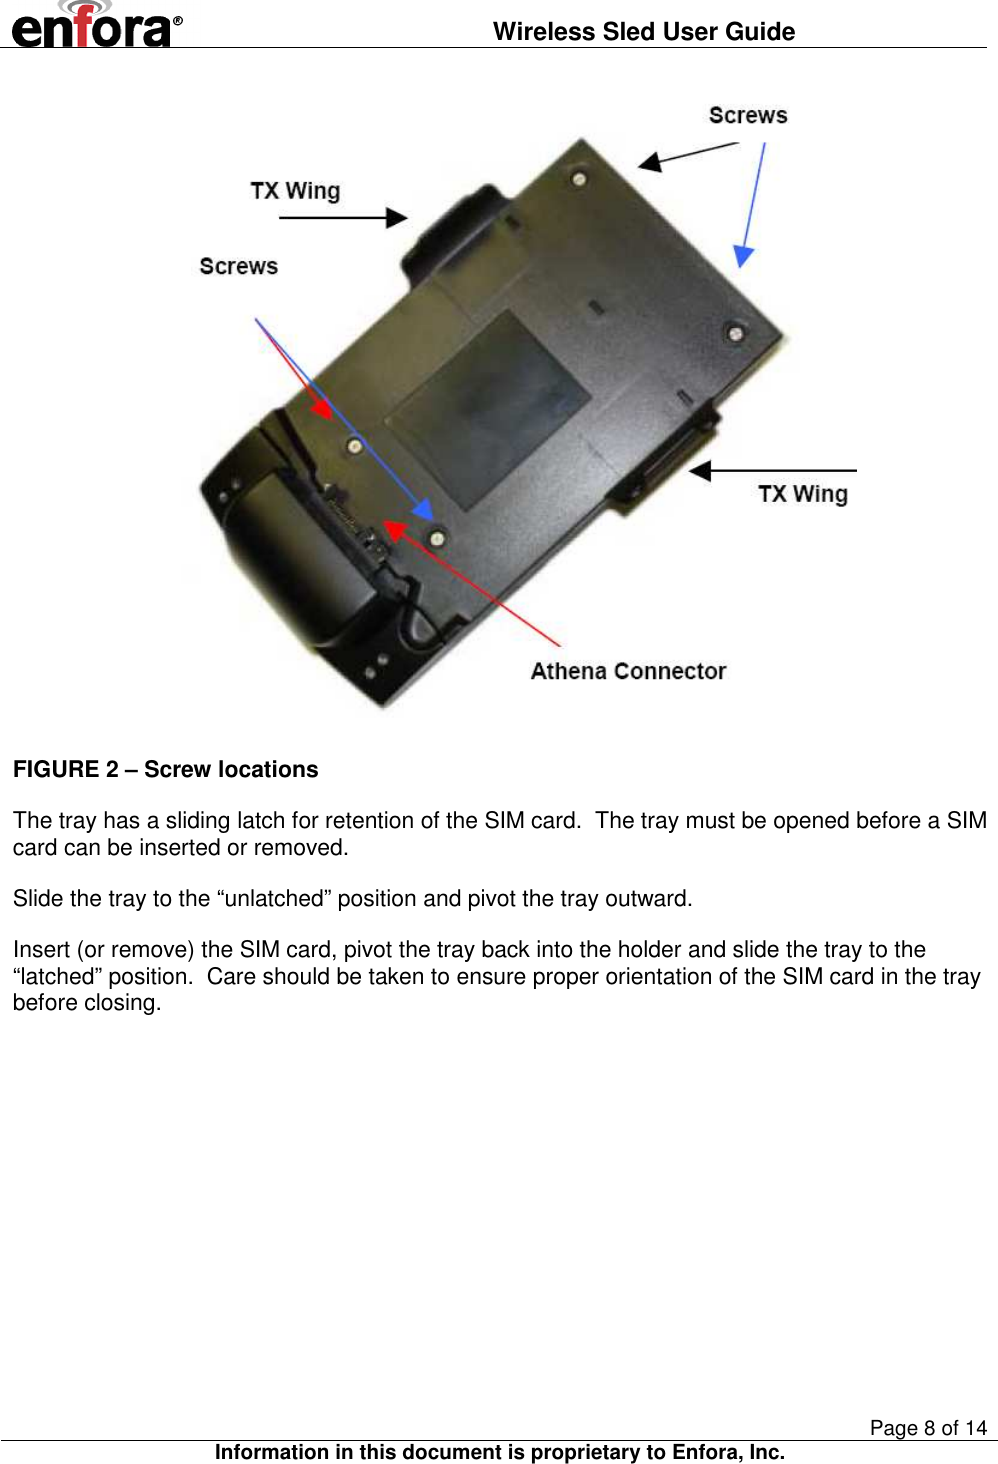  Wireless Sled User Guide       Page 8 of 14 Information in this document is proprietary to Enfora, Inc.   FIGURE 2 – Screw locations The tray has a sliding latch for retention of the SIM card.  The tray must be opened before a SIM card can be inserted or removed. Slide the tray to the “unlatched” position and pivot the tray outward. Insert (or remove) the SIM card, pivot the tray back into the holder and slide the tray to the “latched” position.  Care should be taken to ensure proper orientation of the SIM card in the tray before closing. 